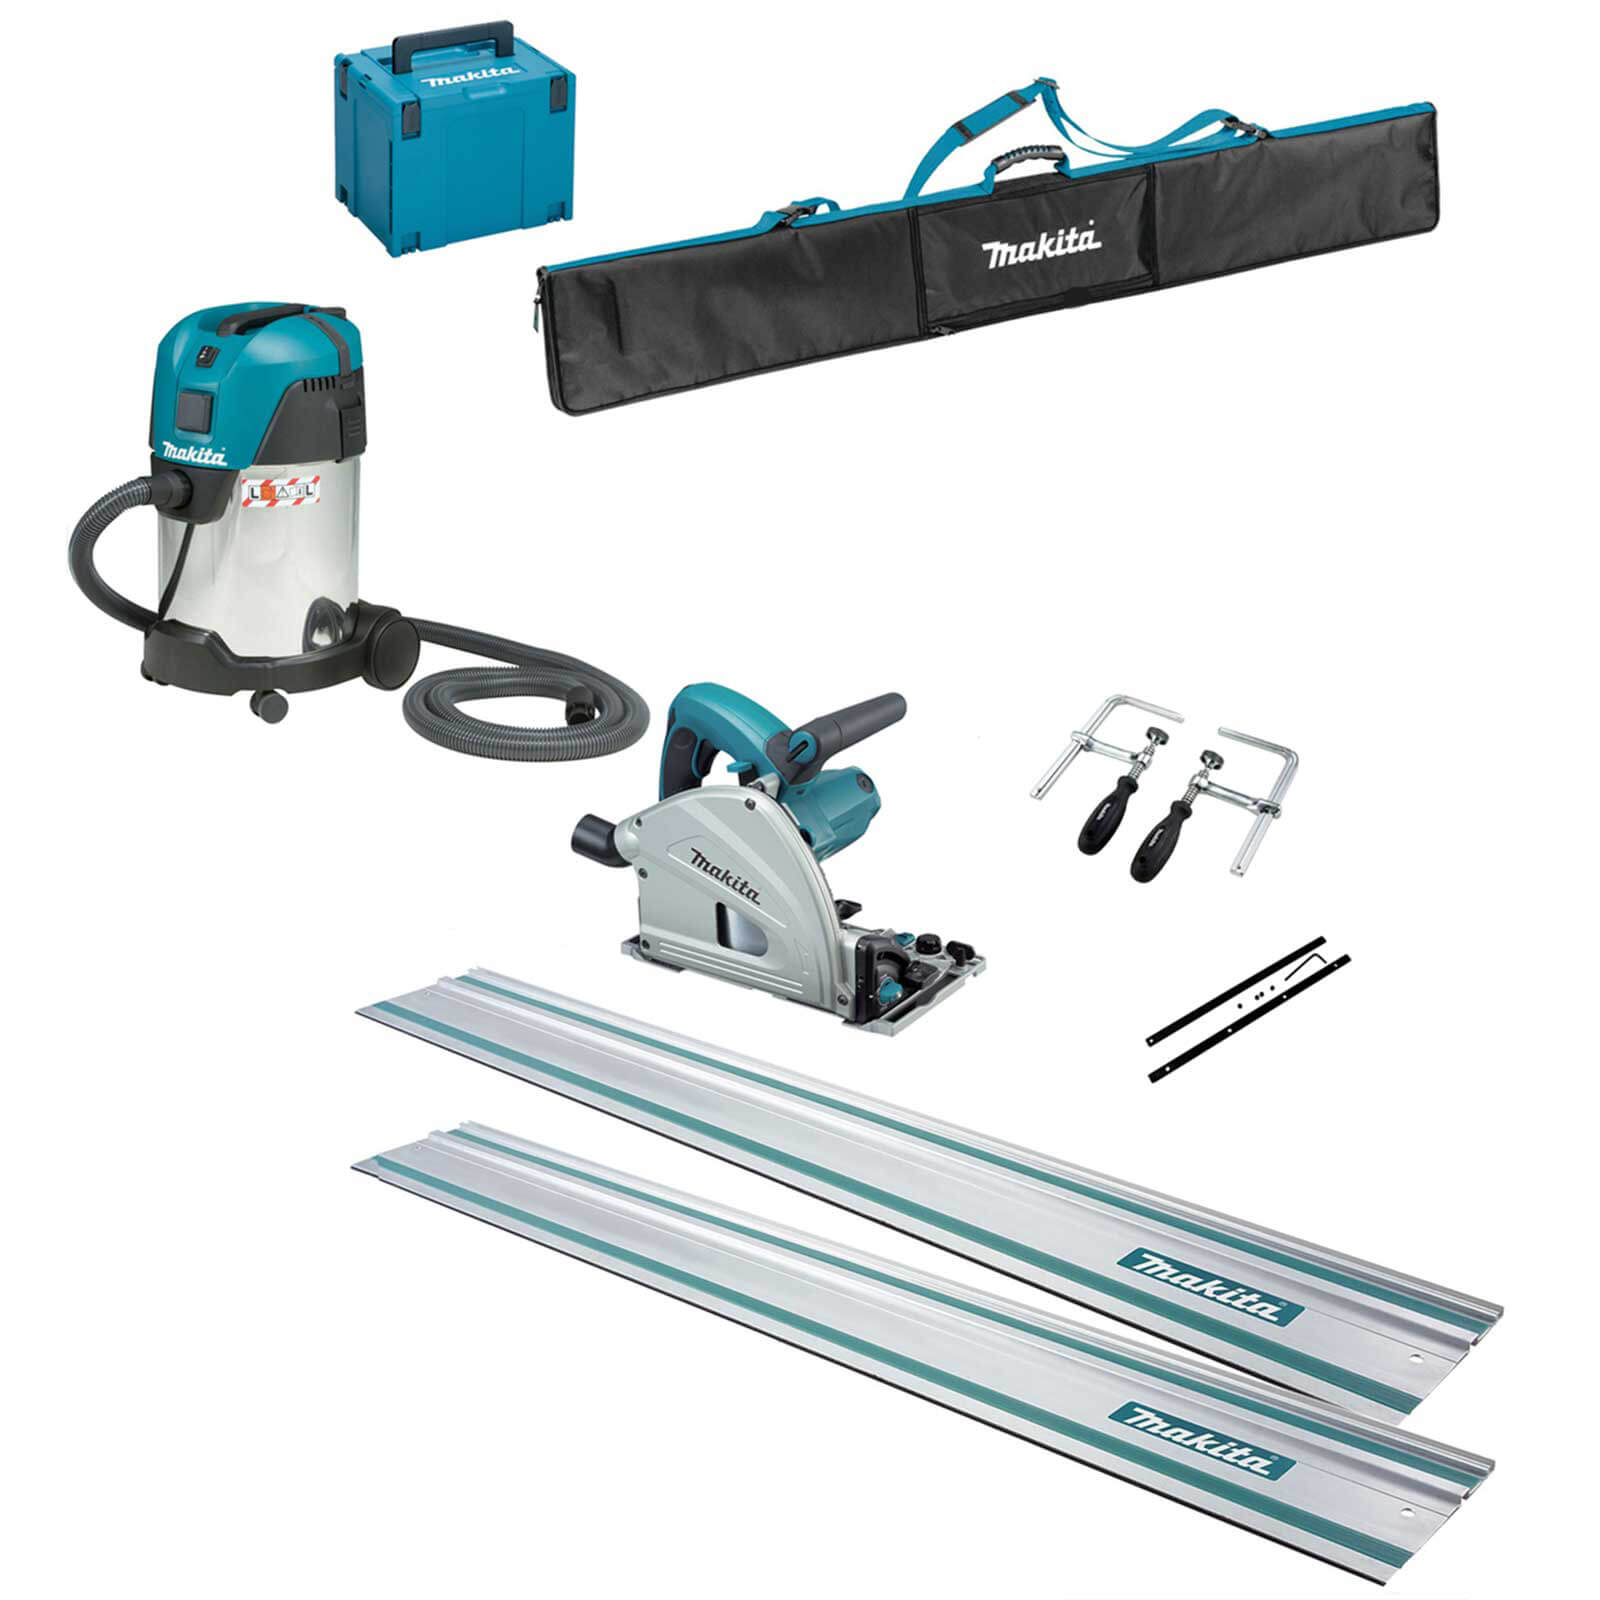 Image of Makita SP6000K7 Plunge Cut Circular Saw and Guide Rail Accessory 7 Piece Set 240v